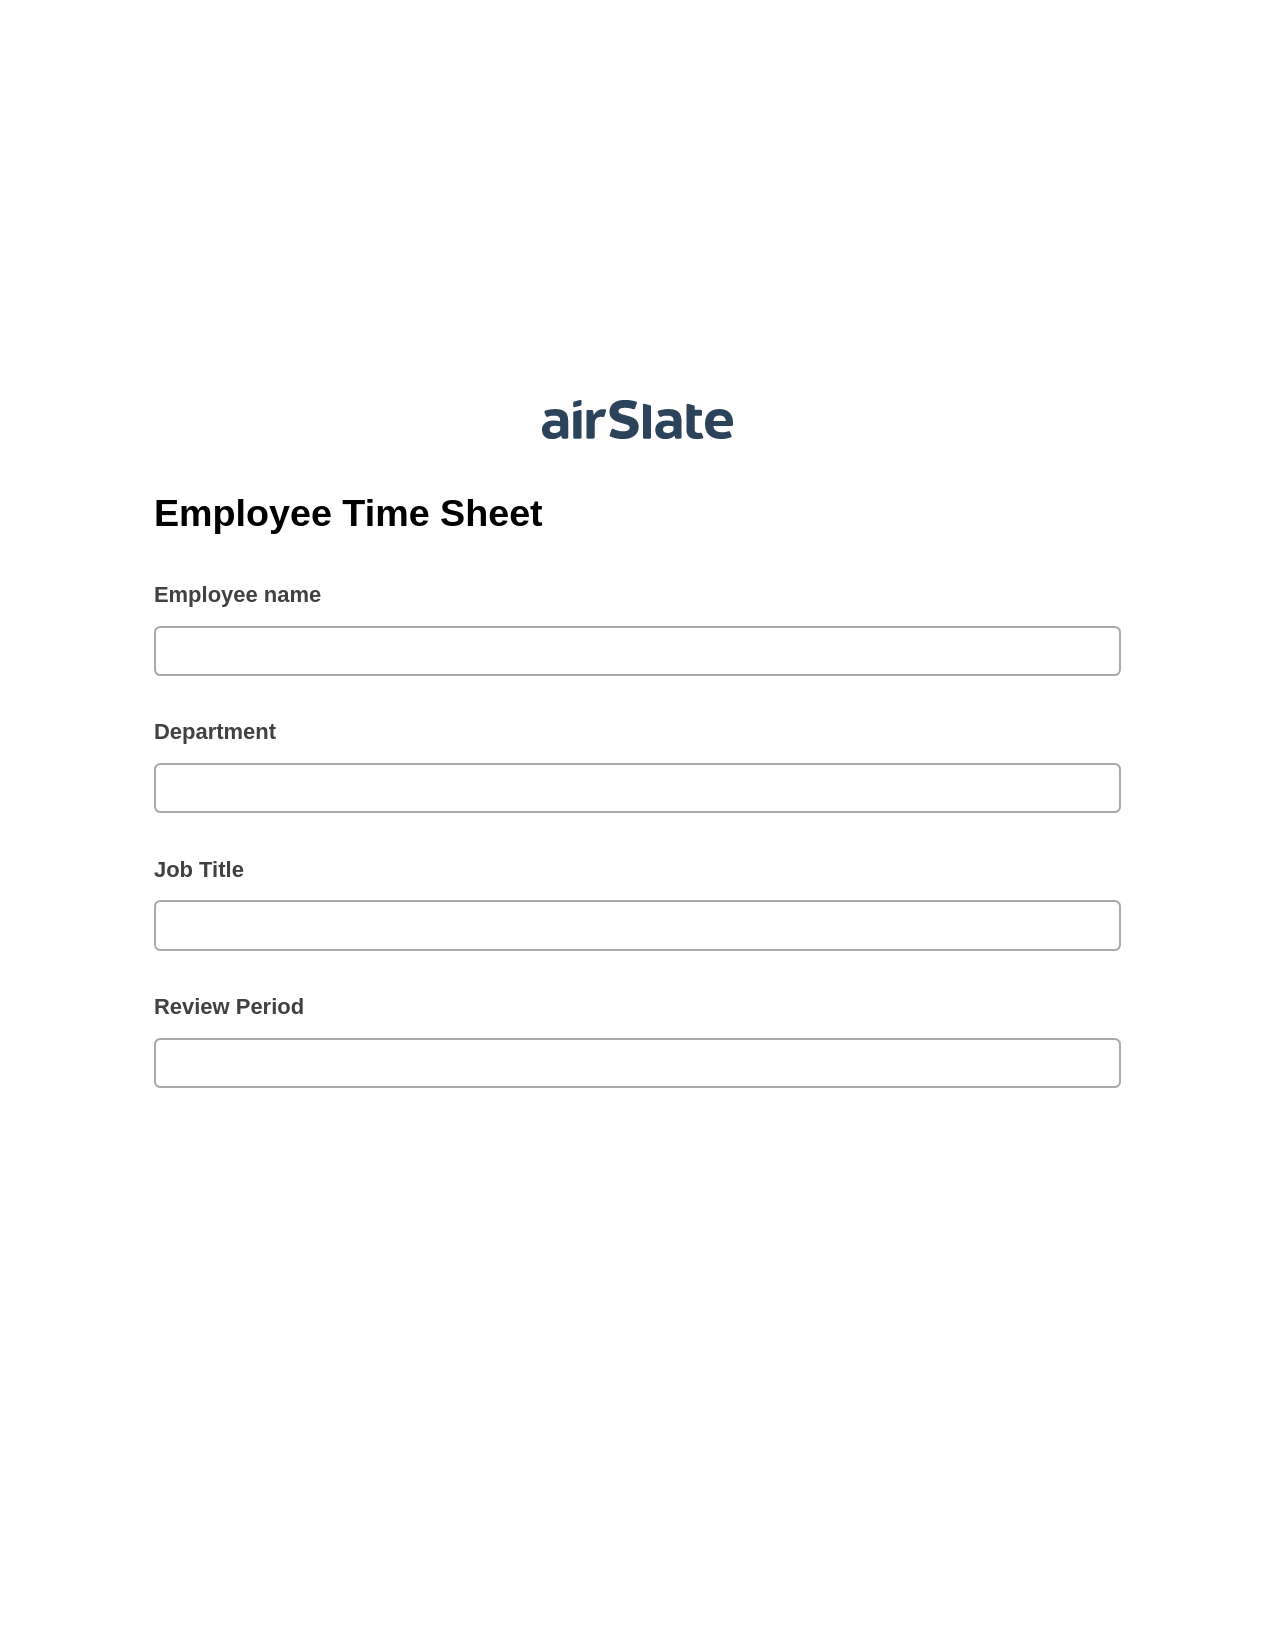 Employee Time Sheet Pre-fill from Smartsheet Bot, Send a Slate with Roles Bot, Archive to SharePoint Folder Bot